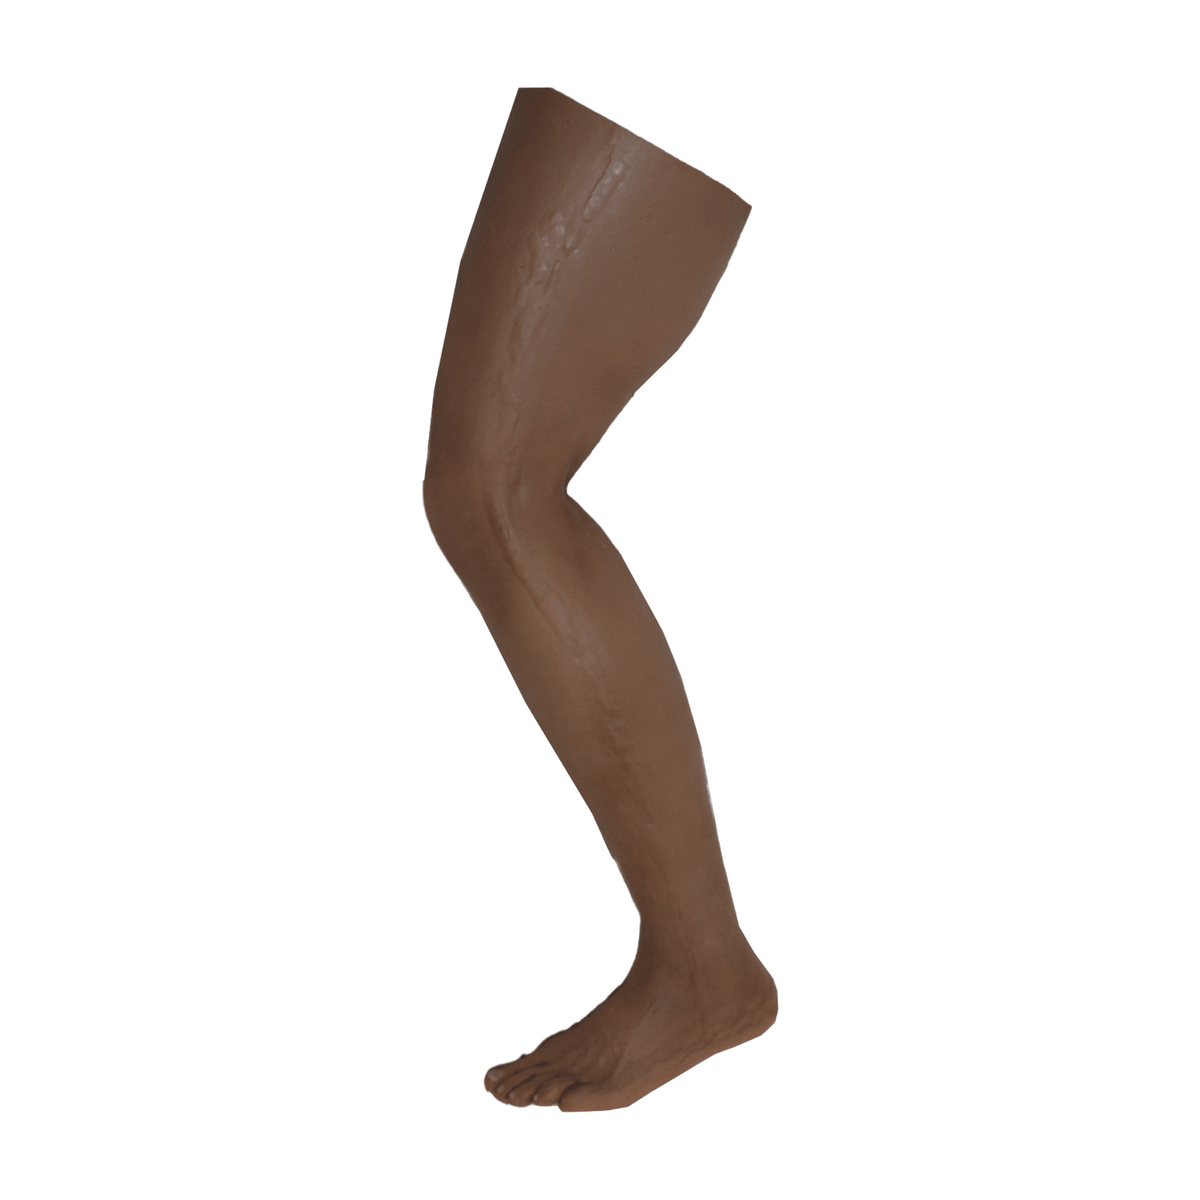 Sonia Severed Leg Prop Clean in Olive